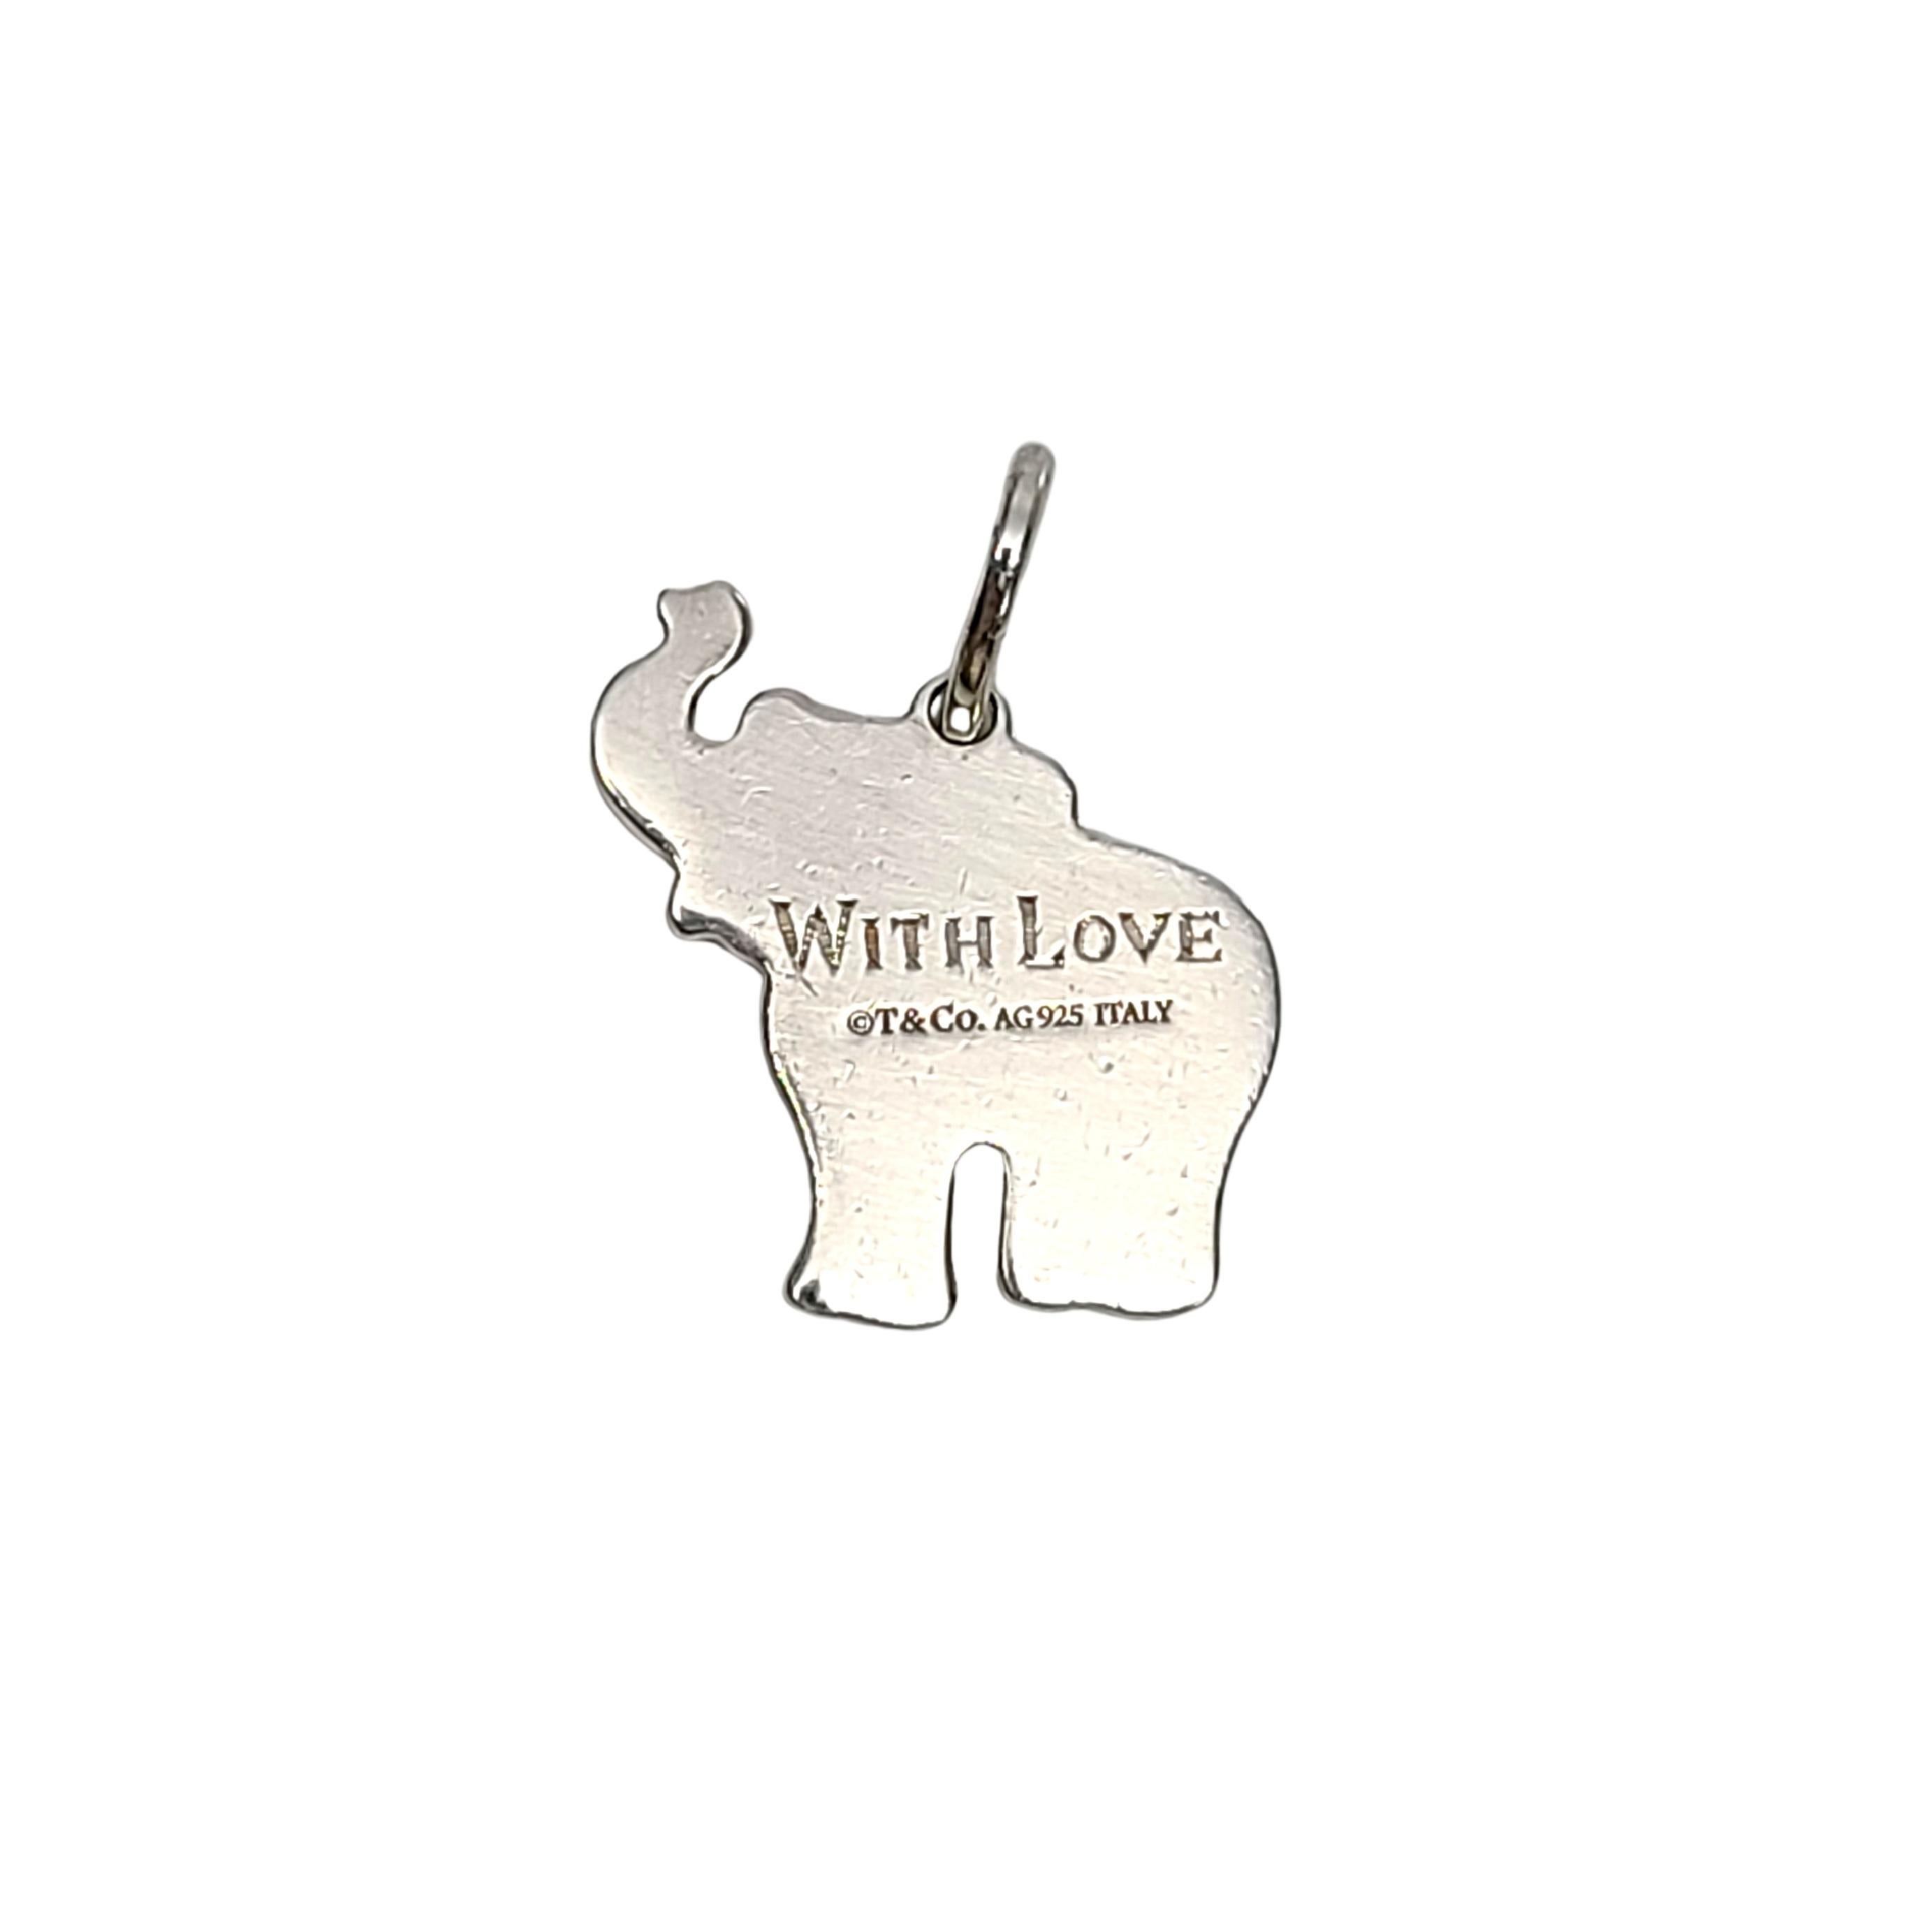 Tiffany & Co sterling silver elephant pendant/charm.

Engraved: 